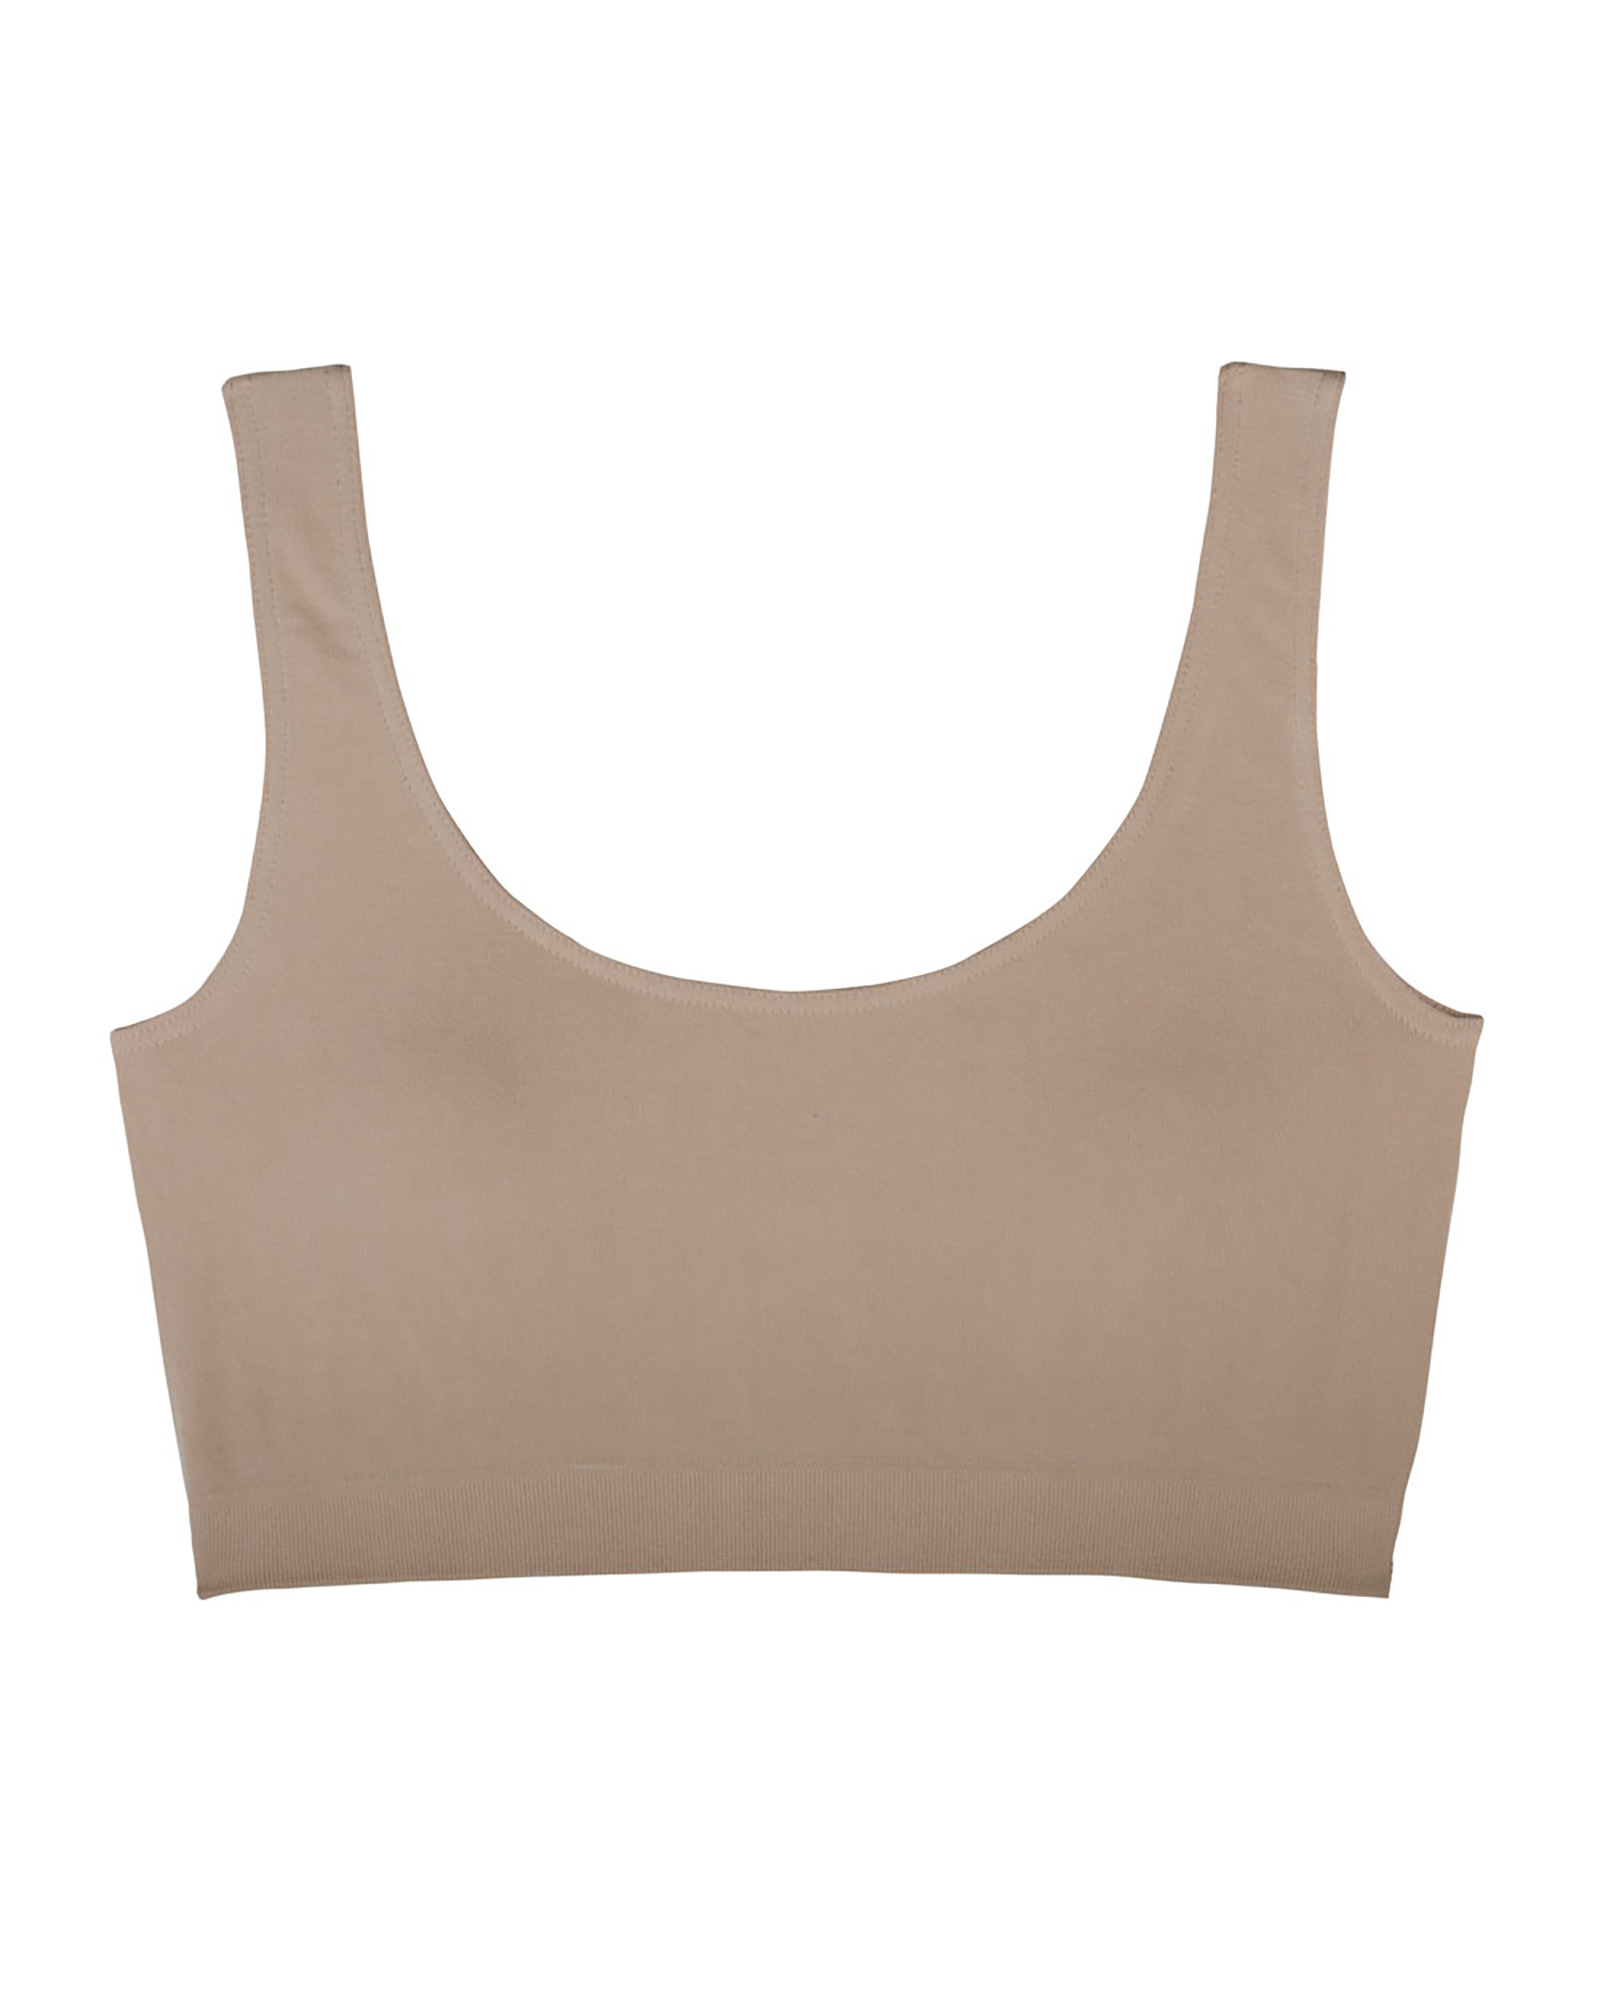 Cosabella Everyday Bralette - Light Brown/Rose - Small